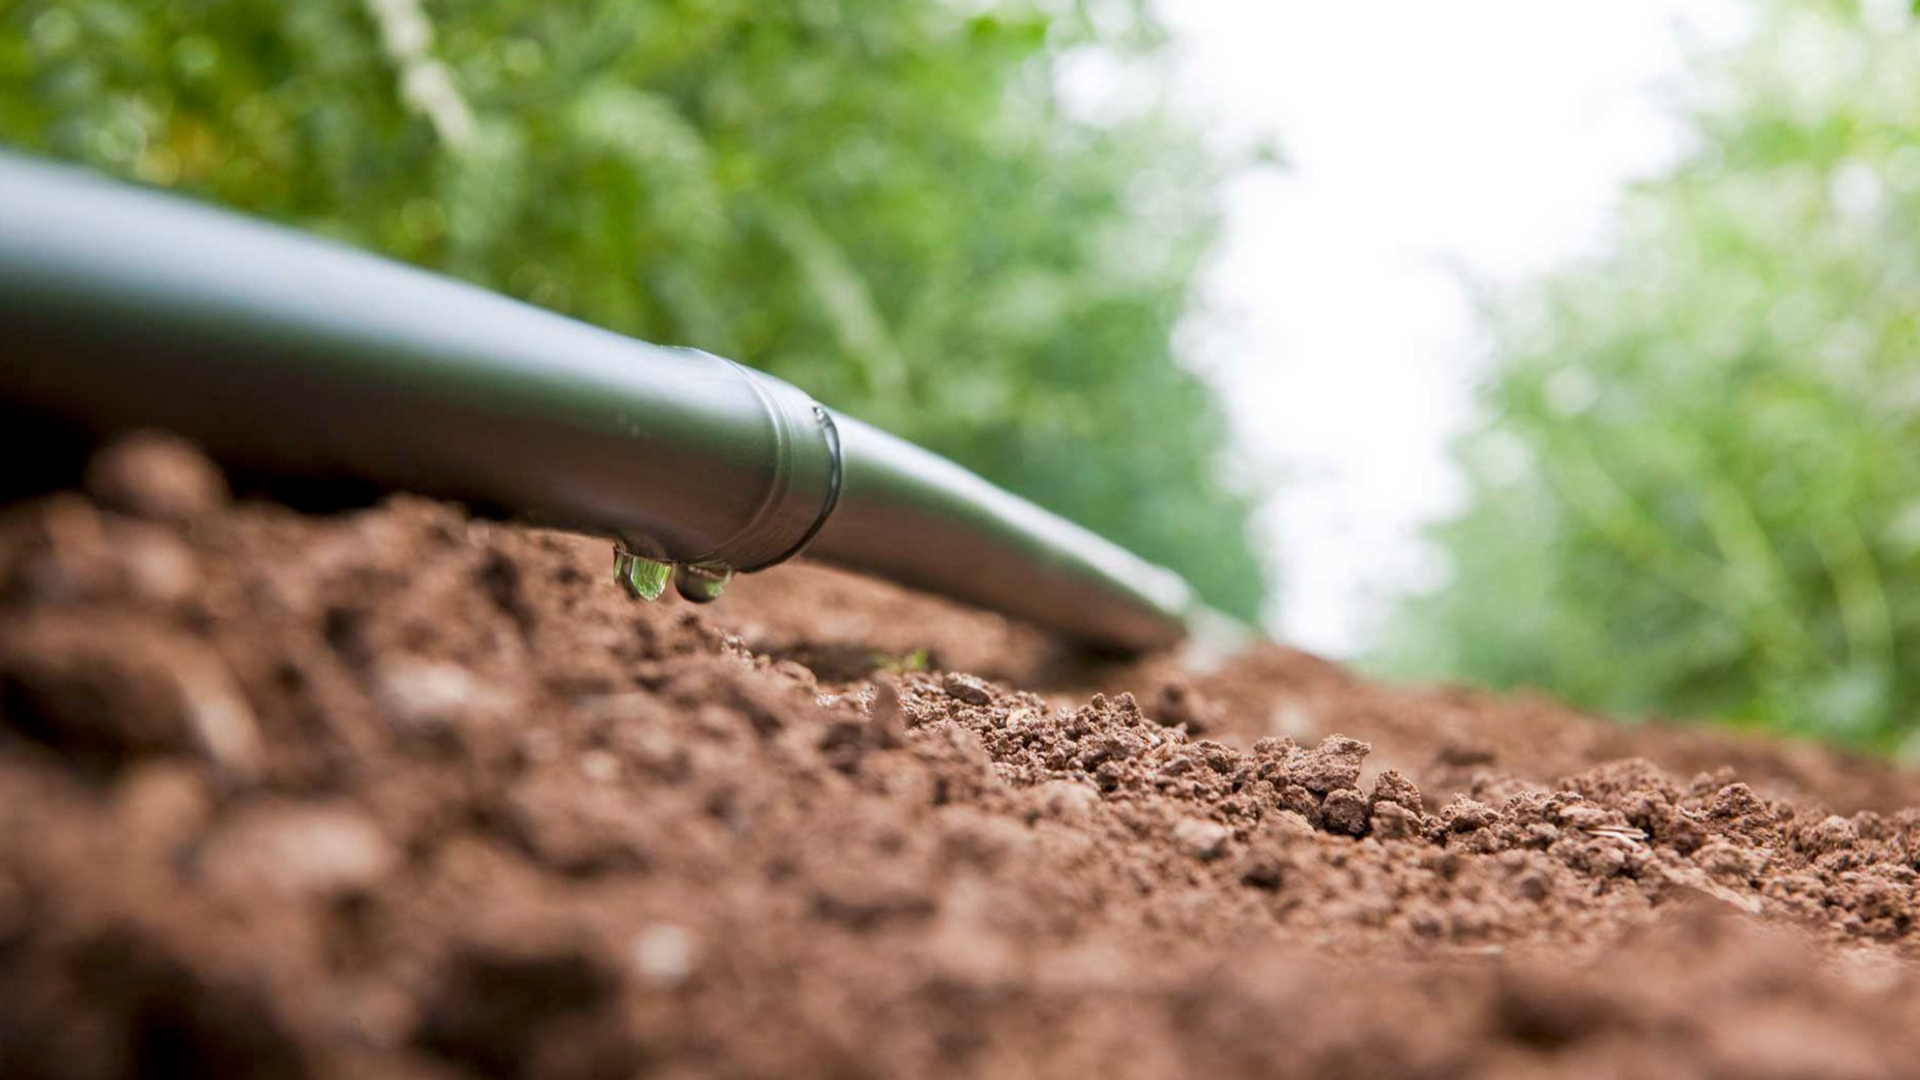 A picture of a drip irrigation line with water dropping out of it onto dirt and plants in the background.